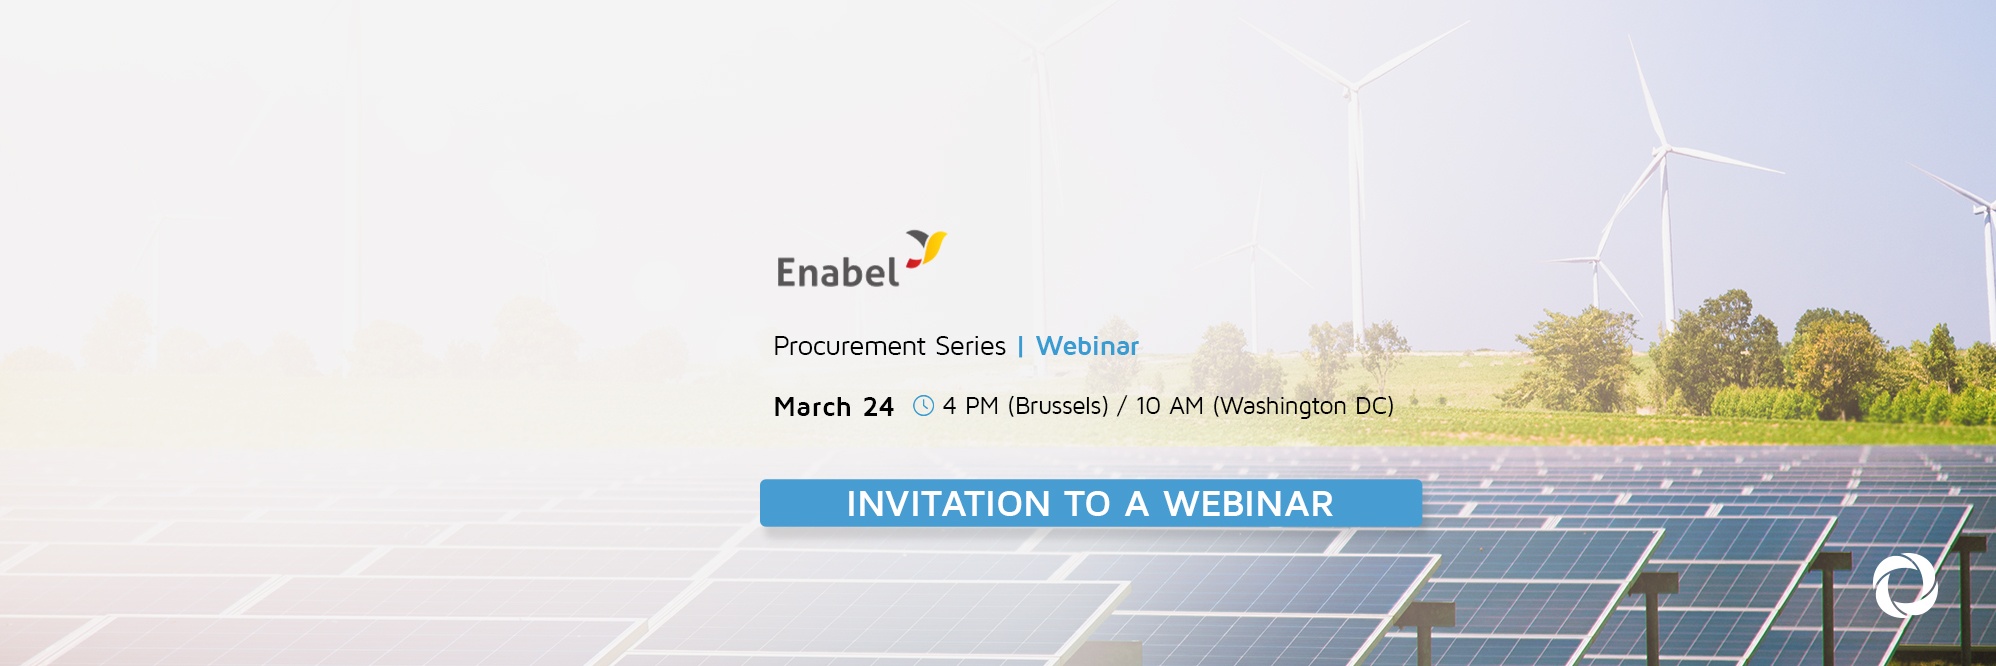 Doing Business with Enabel, the Belgian Development Agency | Invitation to a Webinar